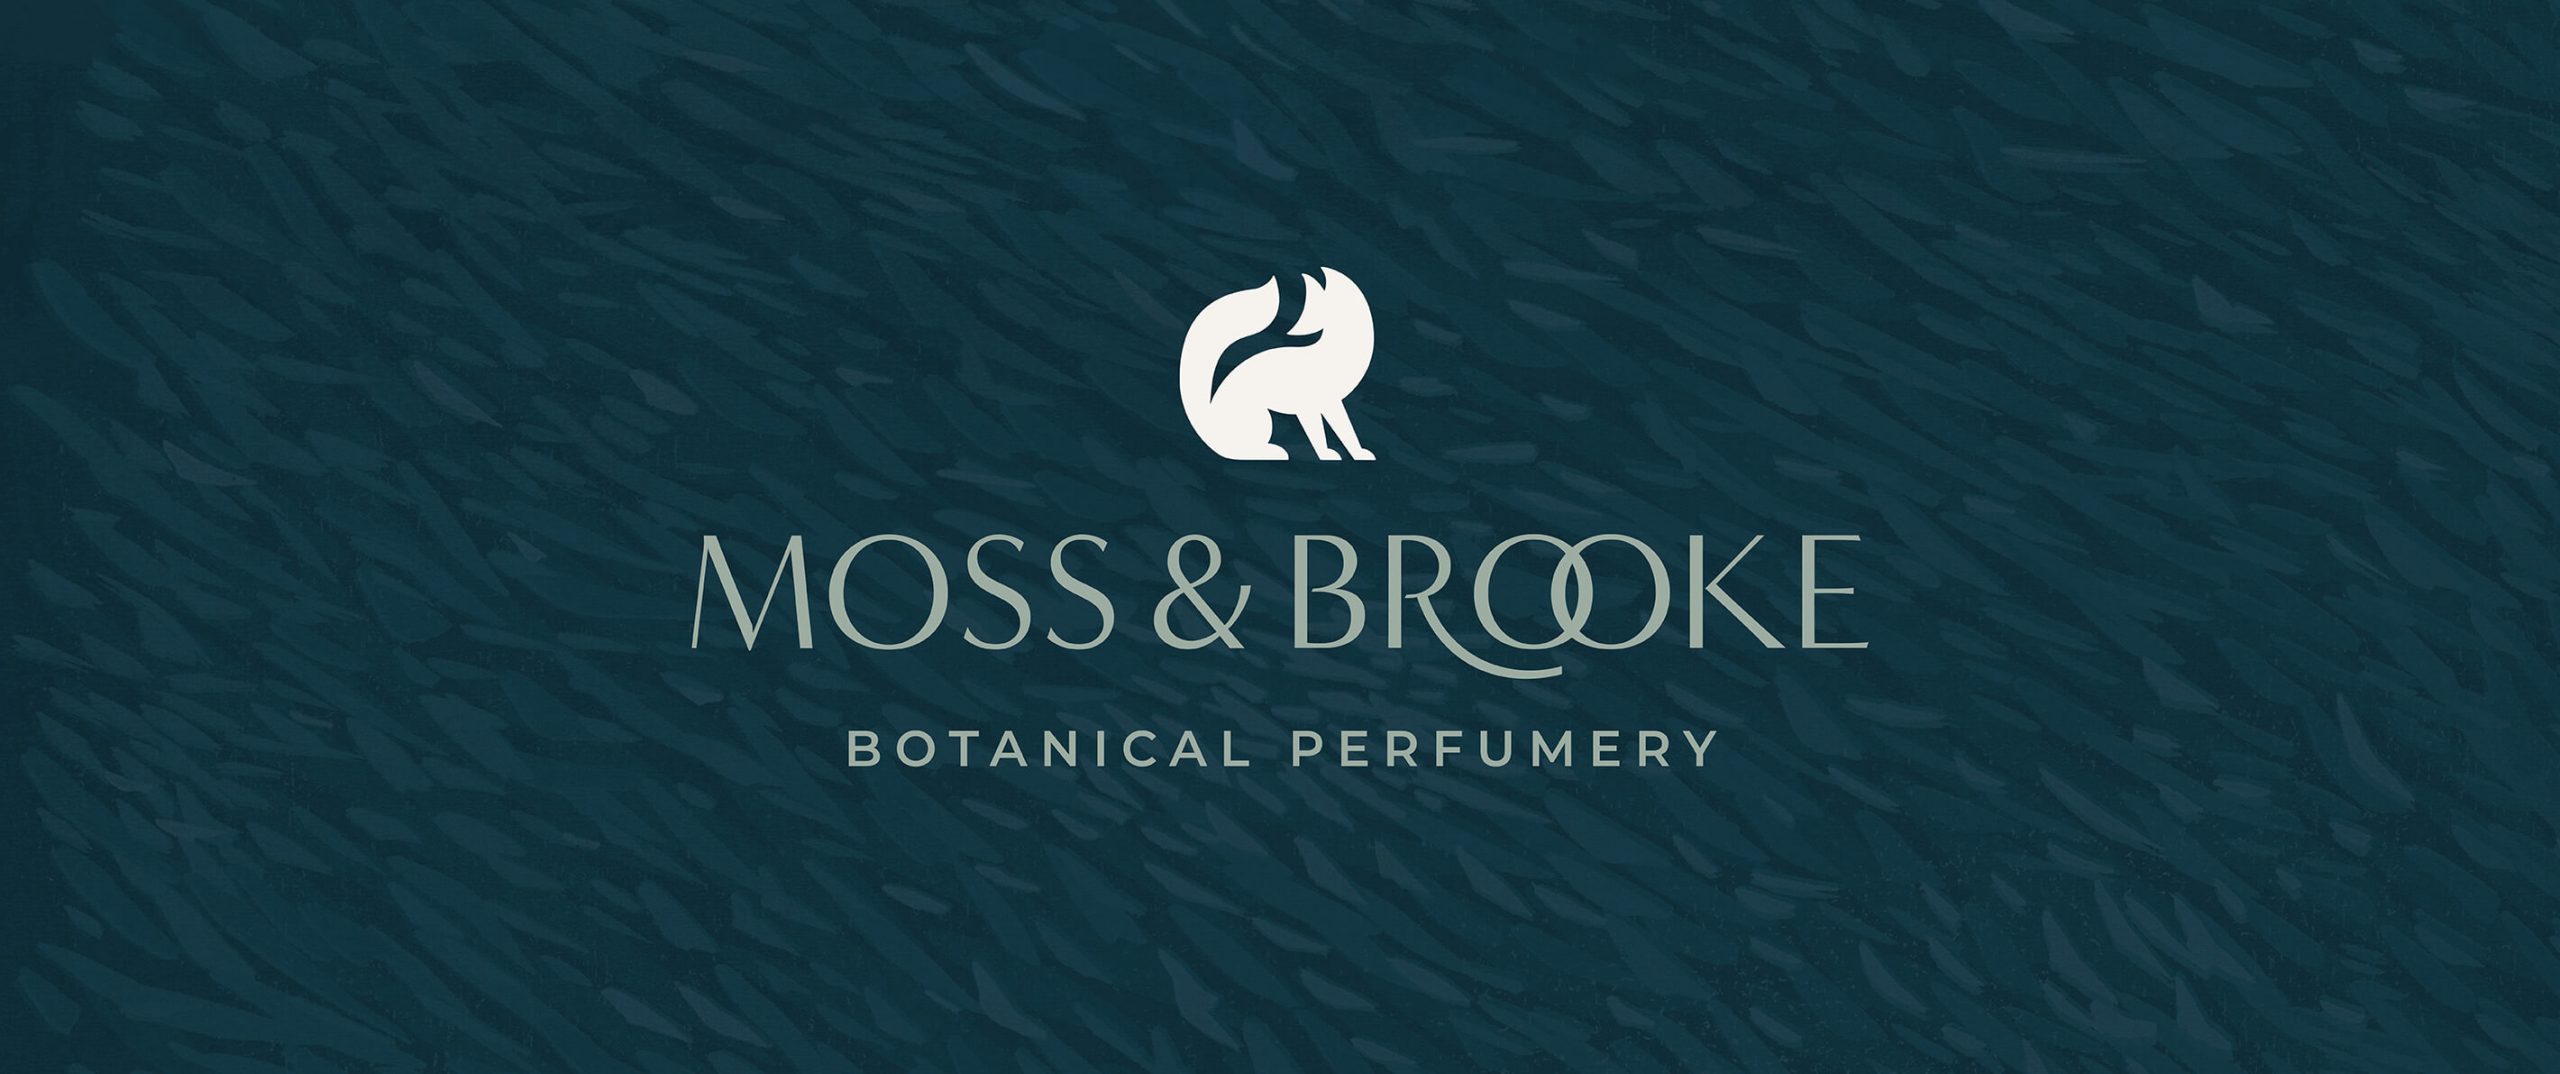 Moss and Brooke custom logo design and fox logo icon over a lush green forest inspired linoprint texture background